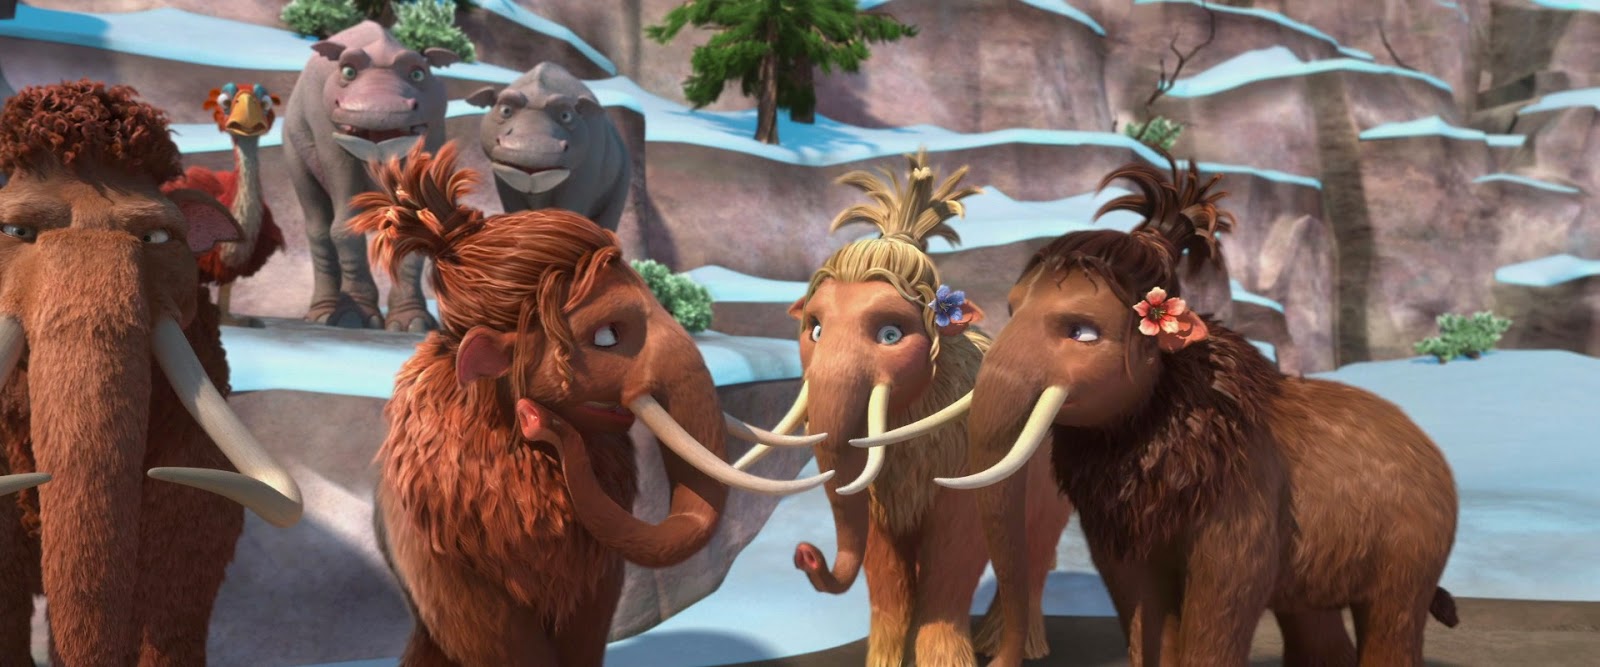 Ice age 4 theme song mp3 download free